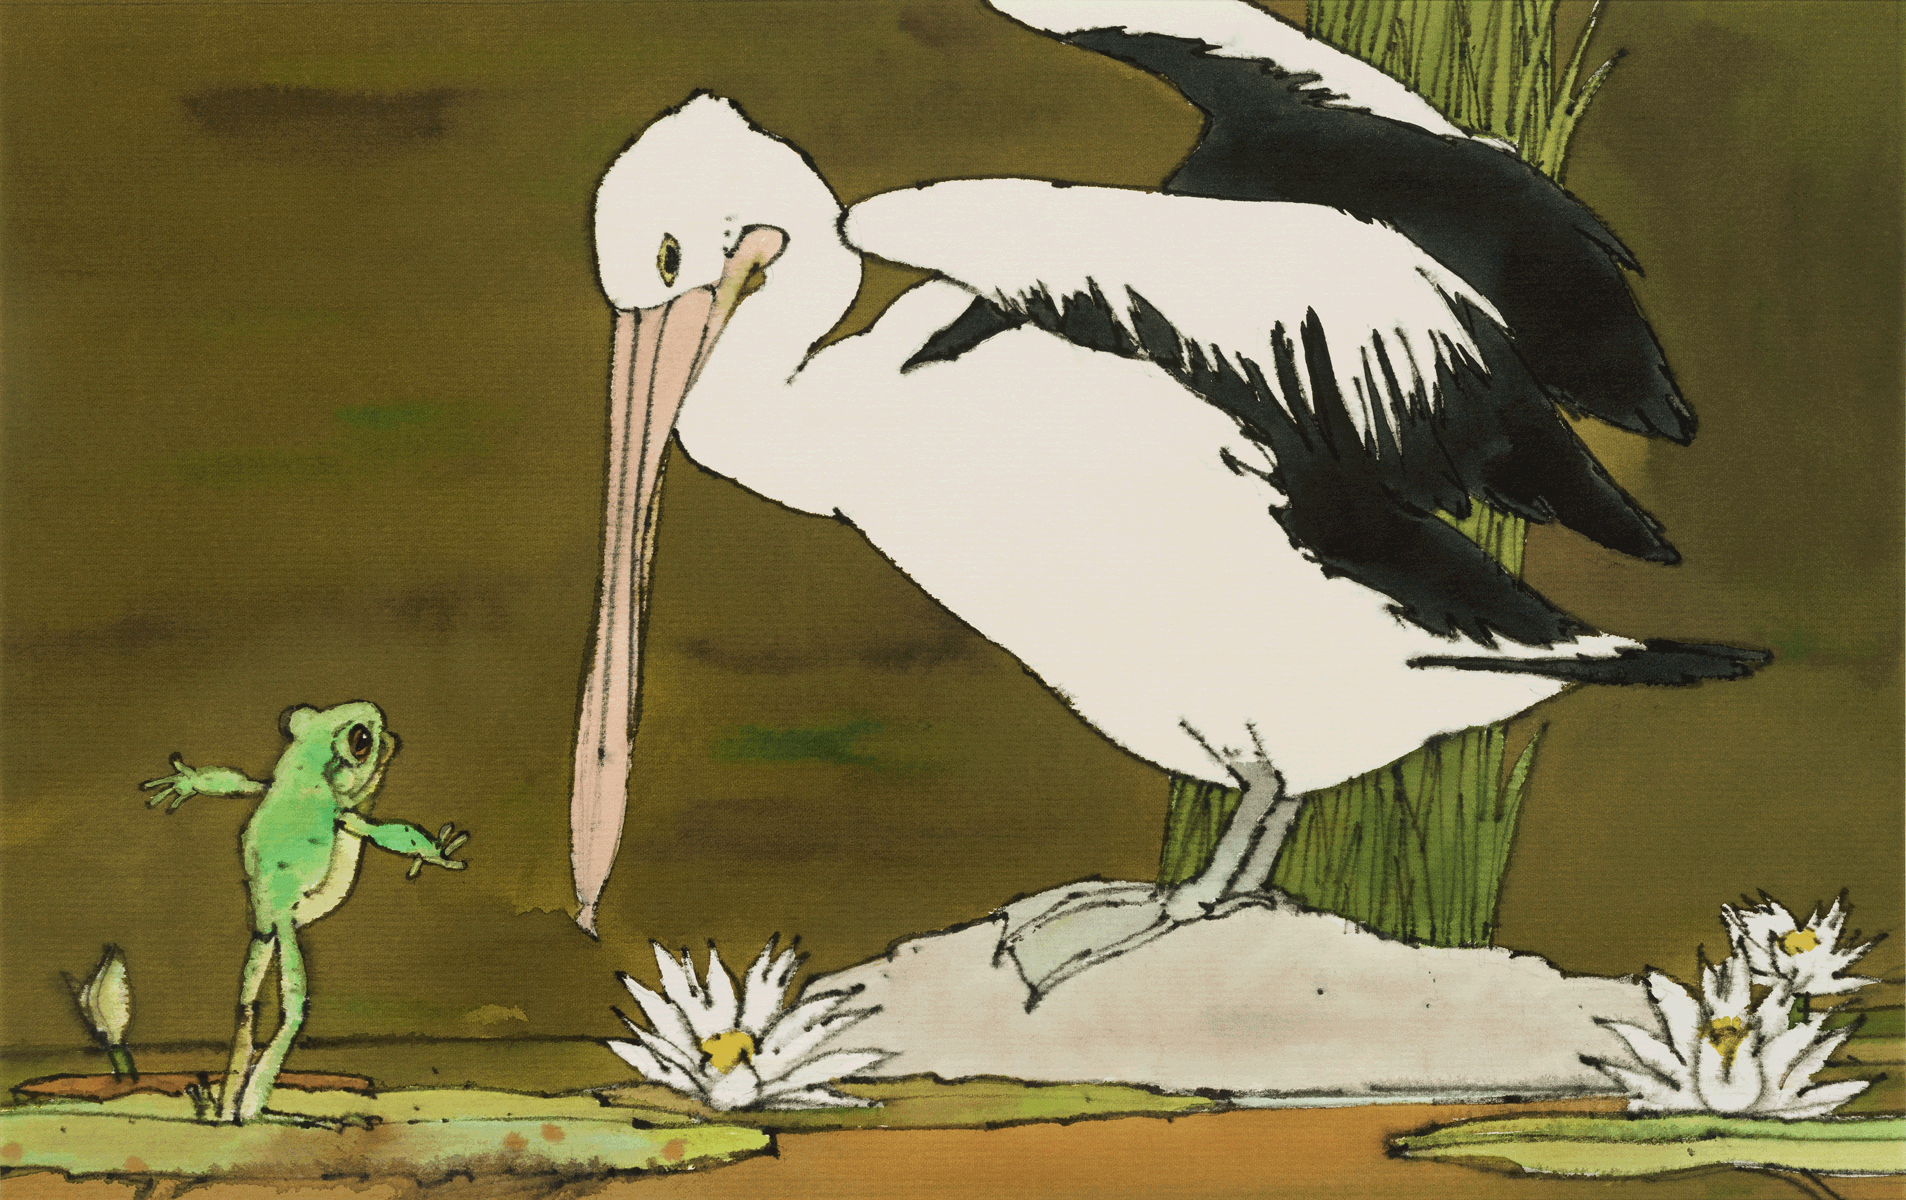 The Frog And The Pelican by Des O'Brien